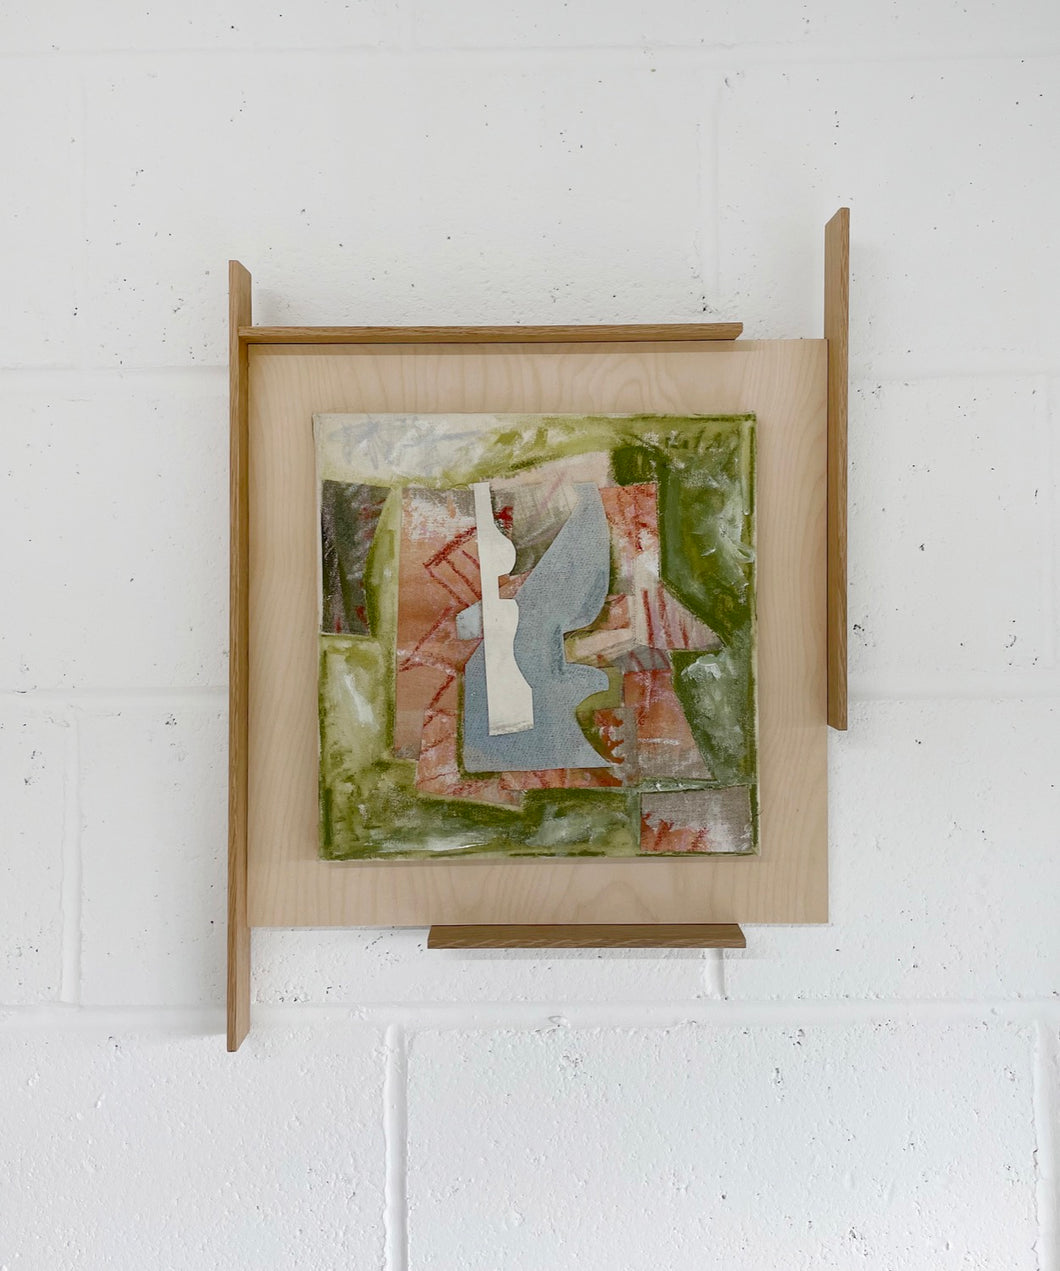 Colourful artwork with abstract wooden framing made by the talented artist Adriana Jaros.